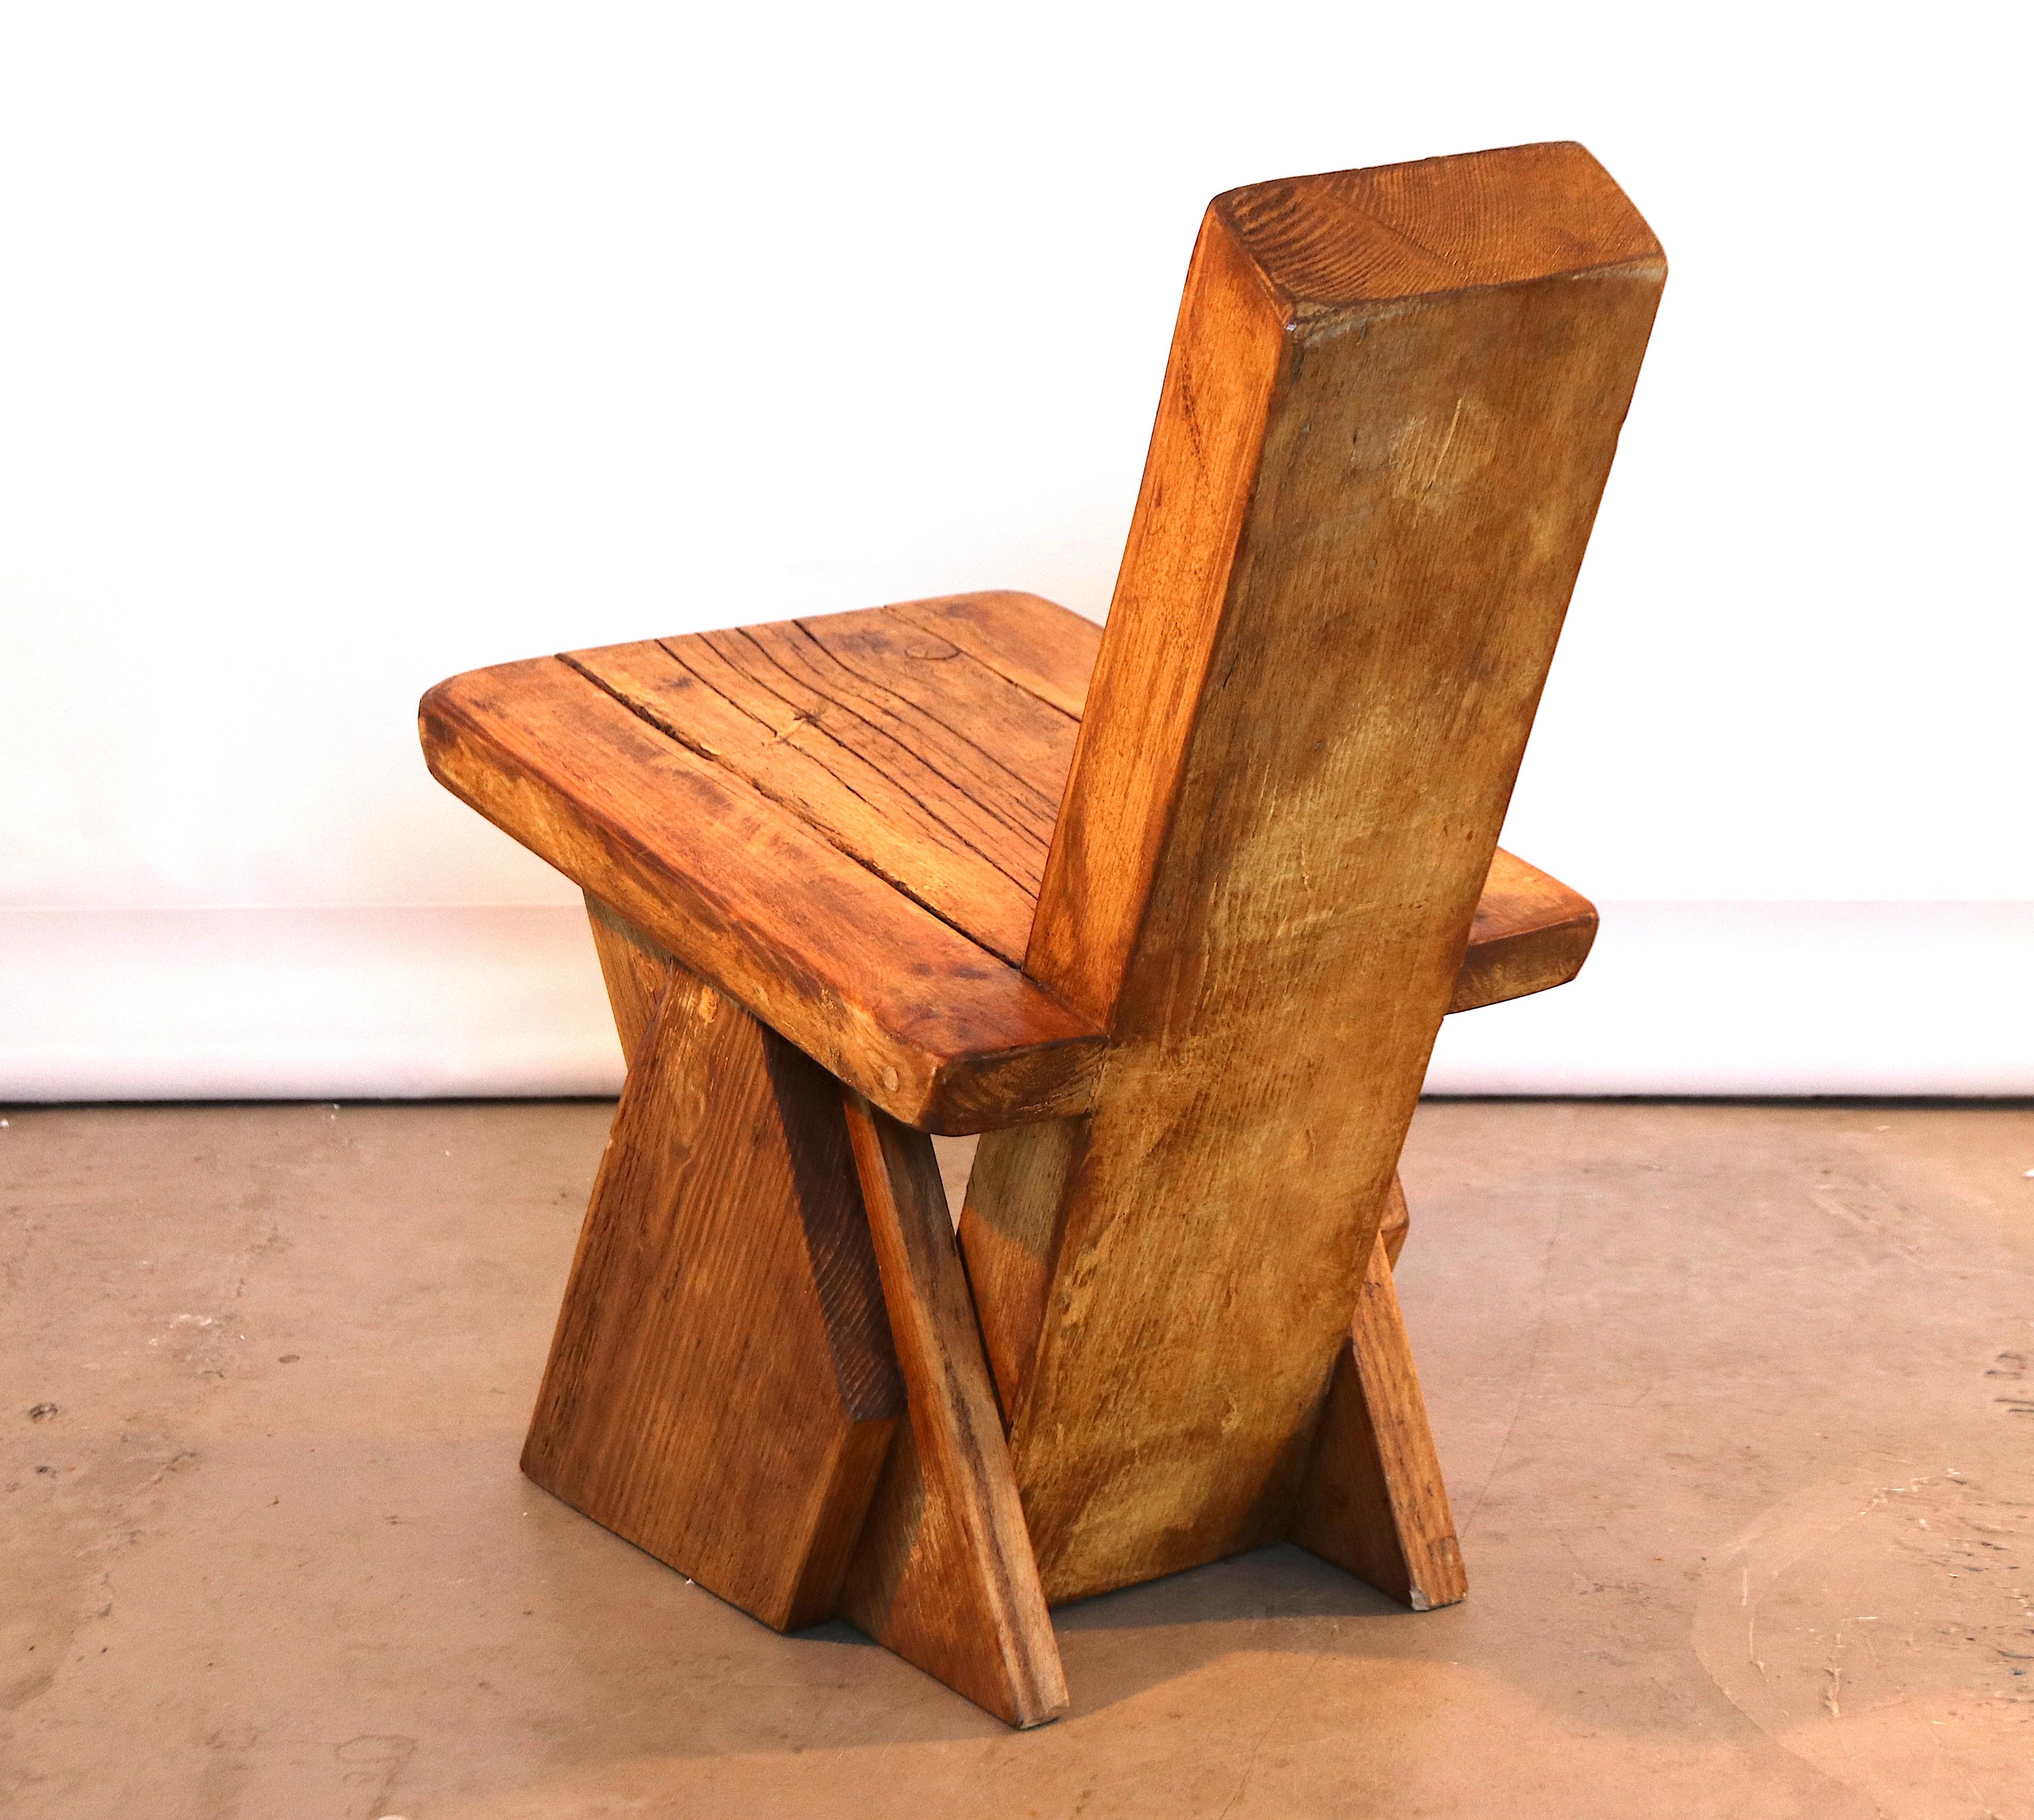 Mid-20th Century Brutalist Pierre Jeanneret Style Decorative Stool or Low Chair in French Oak